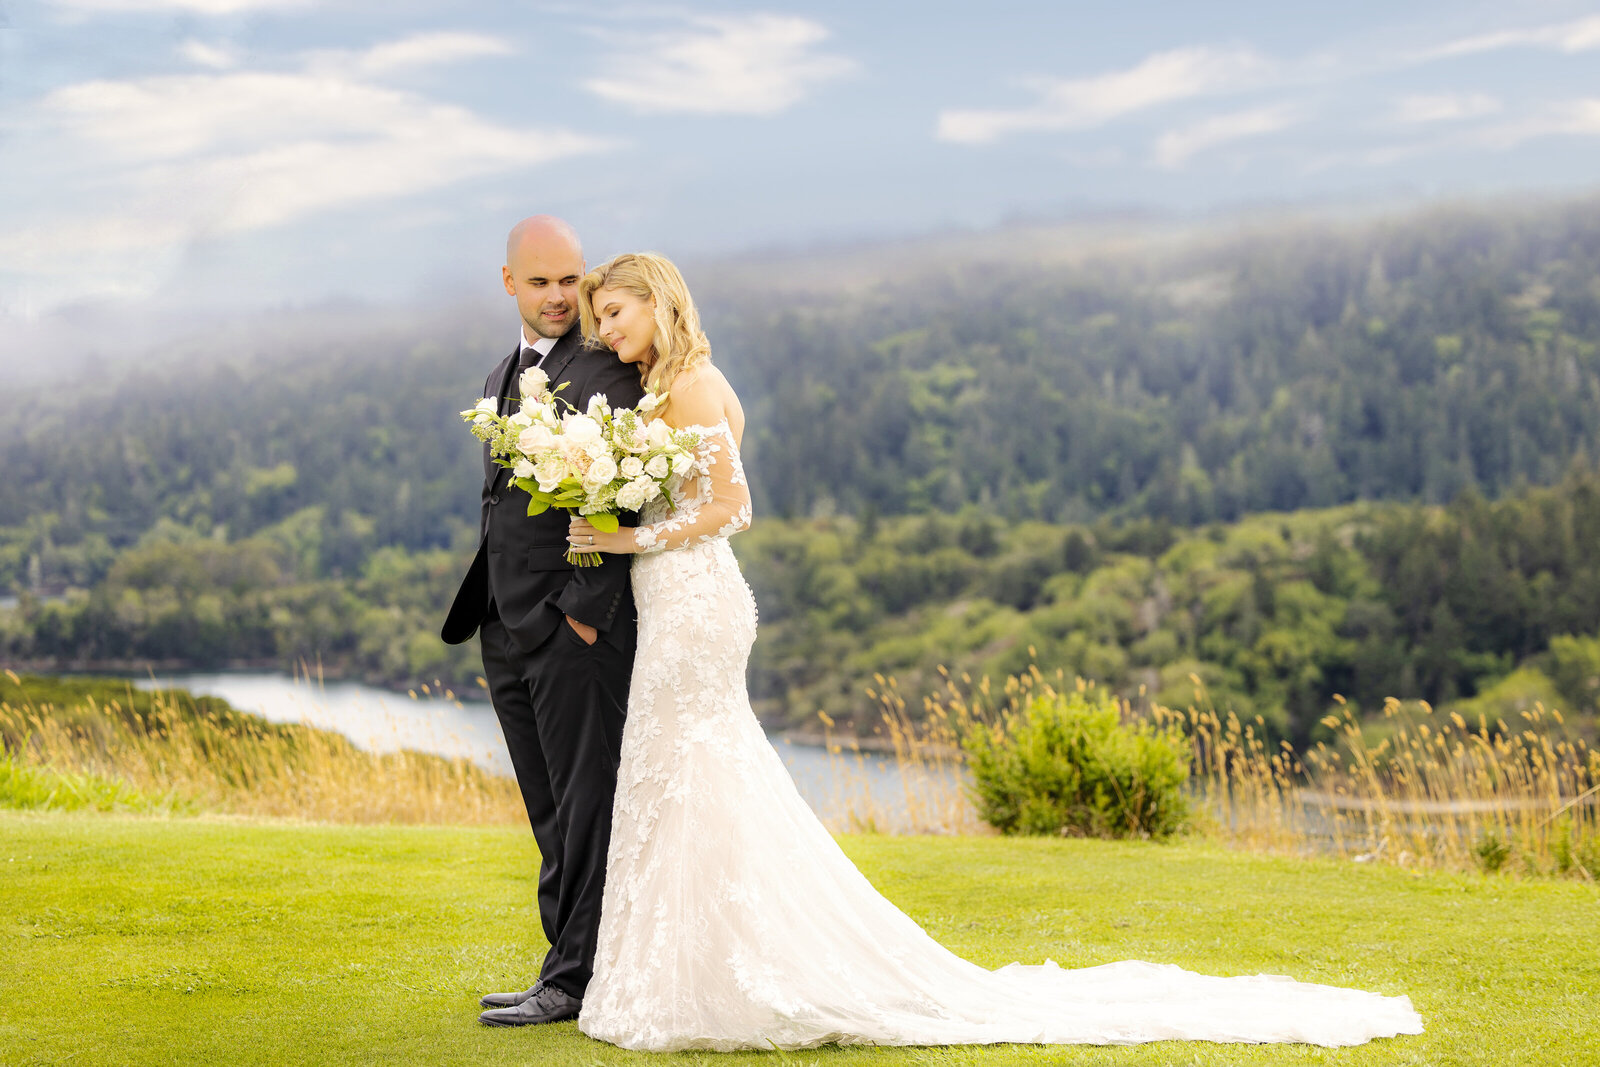 A bride hugs groom from behind in front of green mountains and lake. Photo by Sacramento photography studio, philippe studio pro.